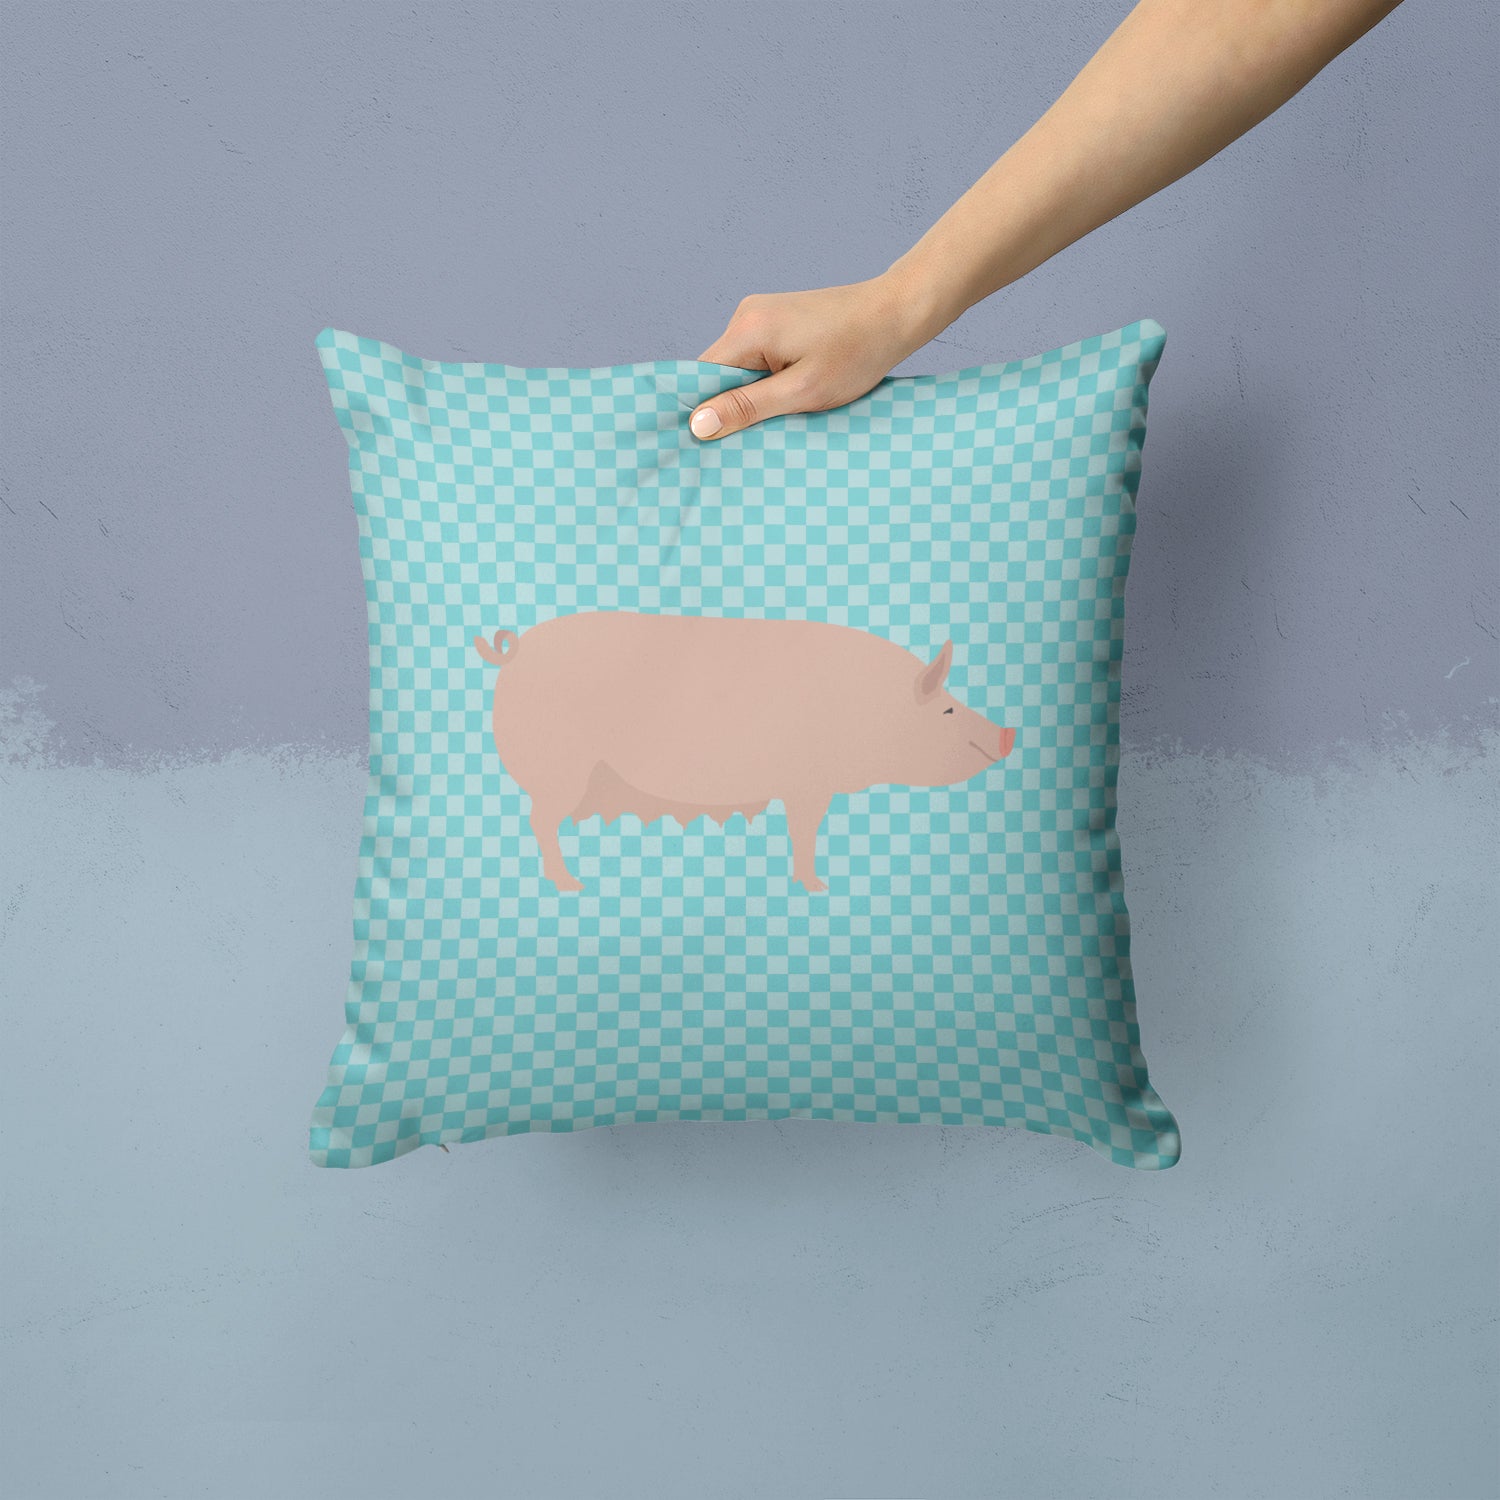 English Large White Pig Blue Check Fabric Decorative Pillow BB8112PW1414 - the-store.com